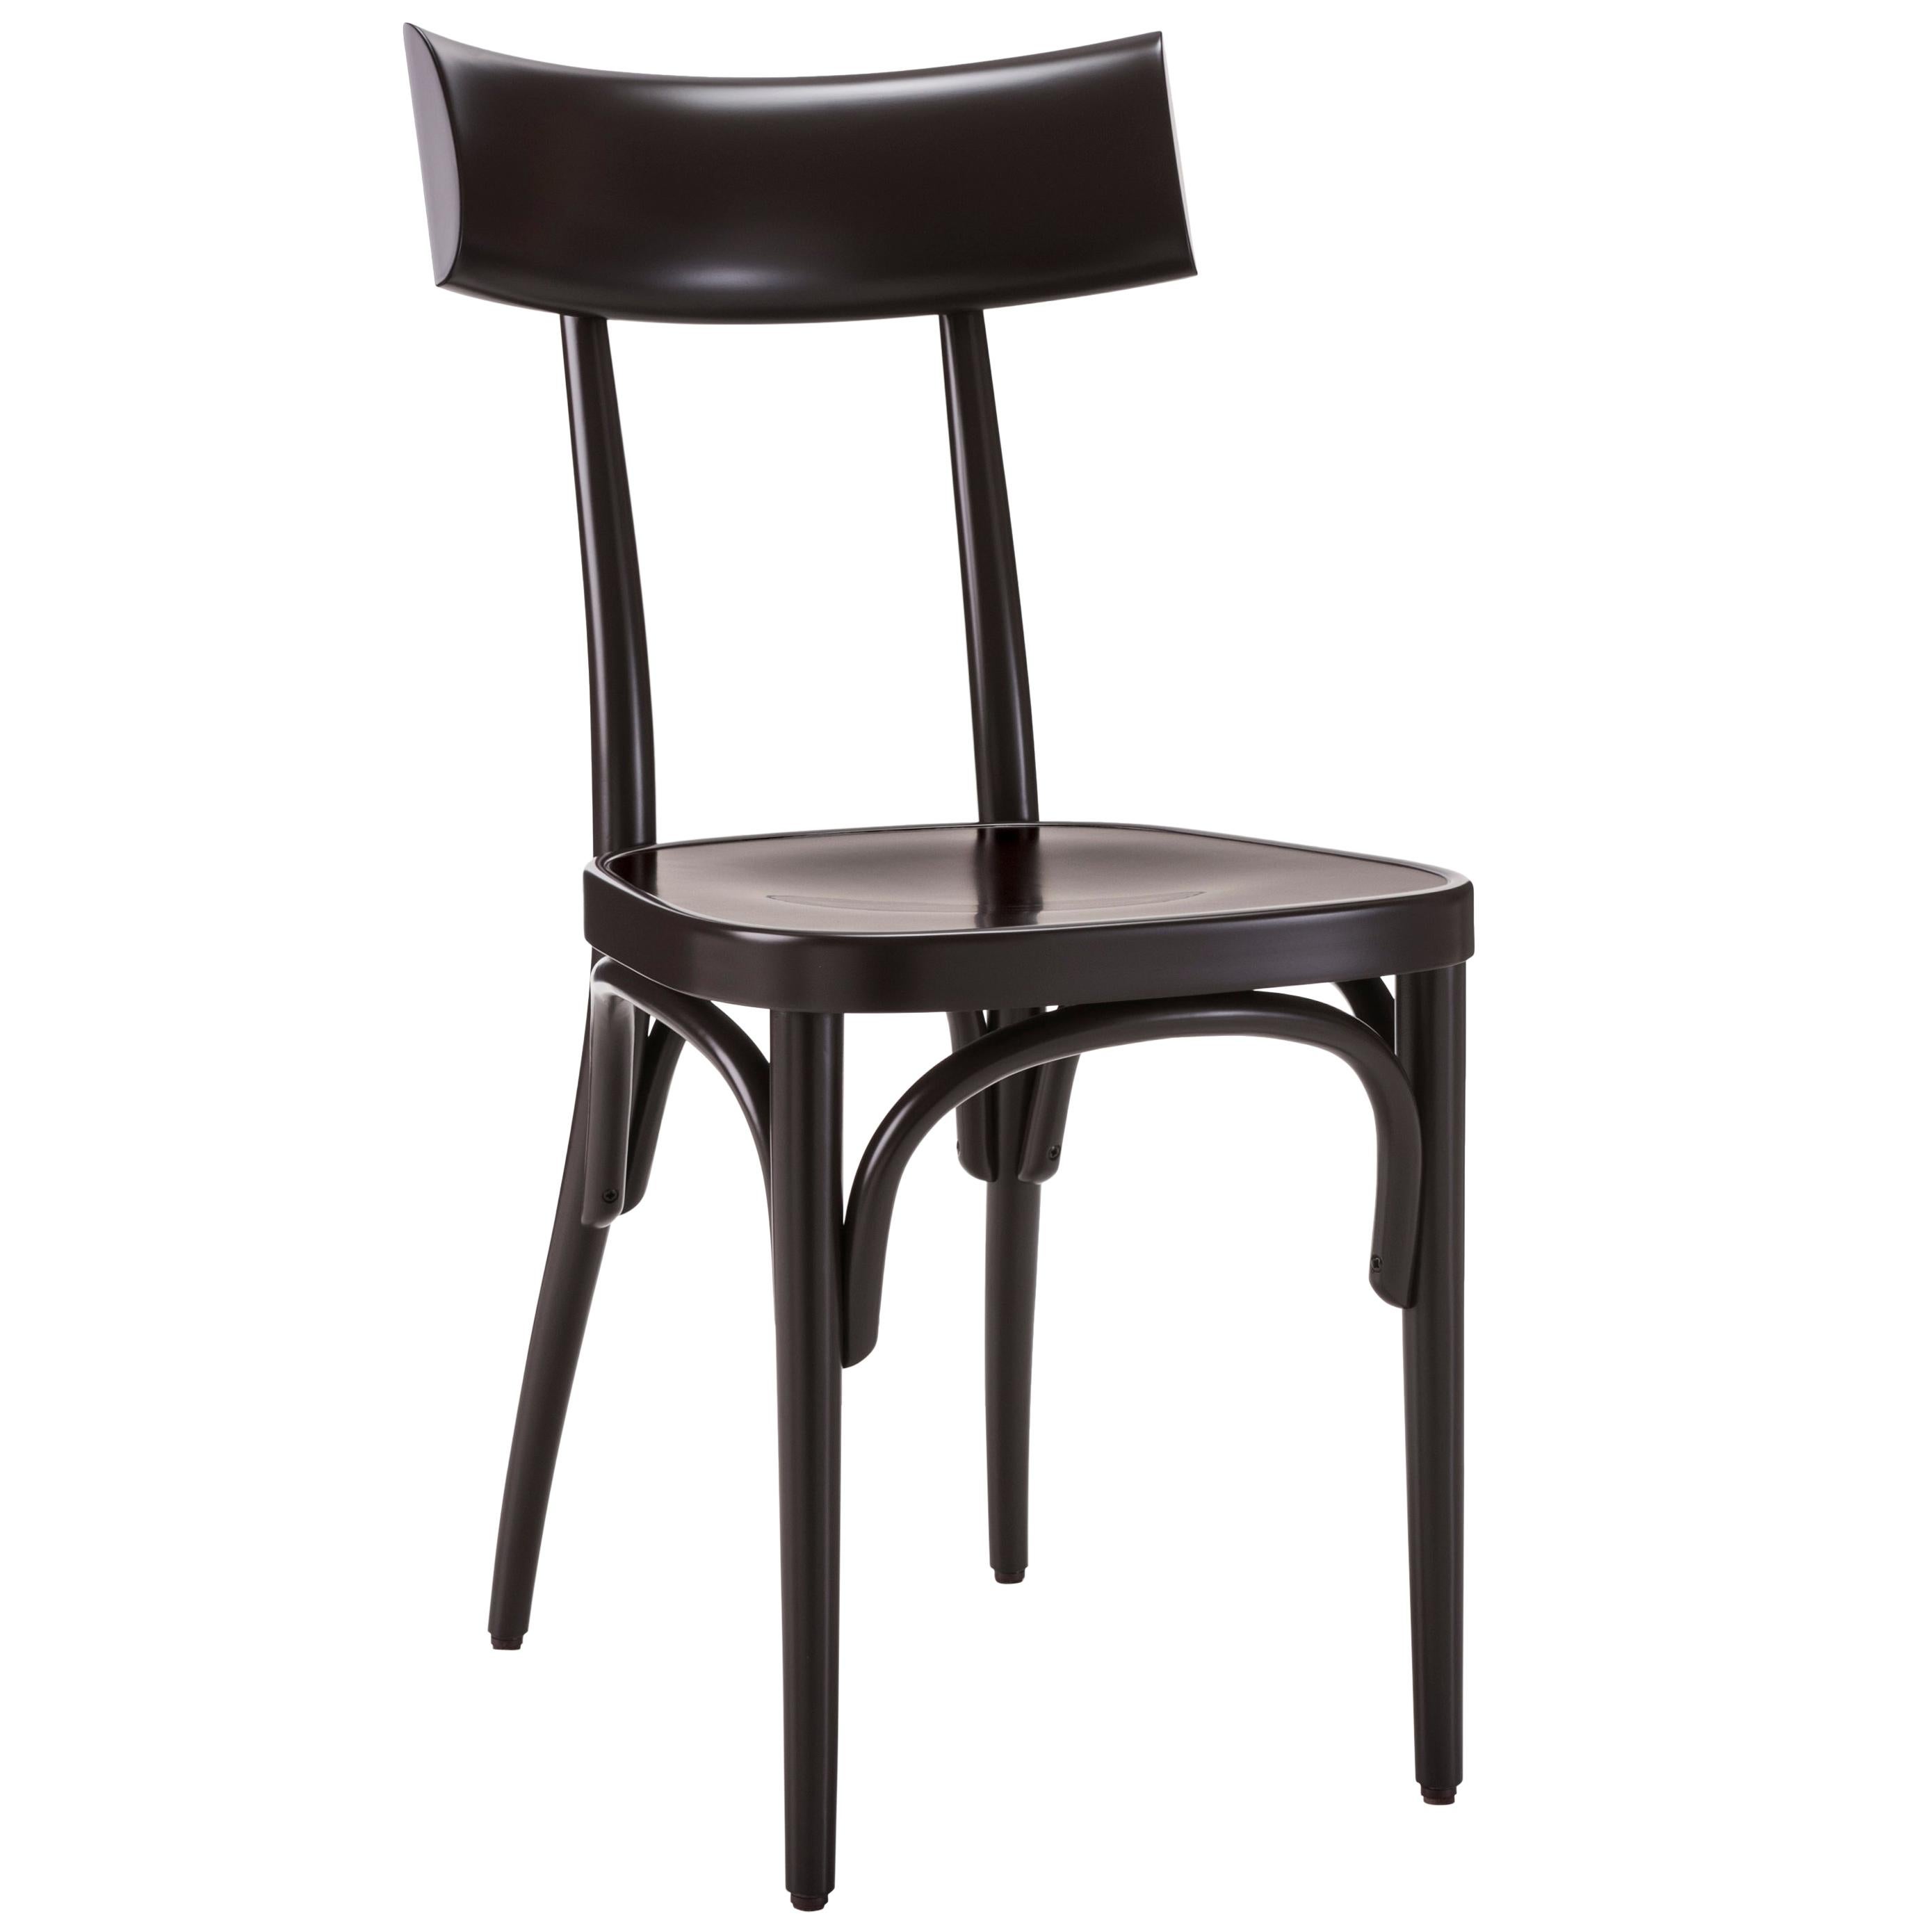 Gebrüder Thonet Vienna GmbH Czech Chair in Black with Plywood Seat For Sale